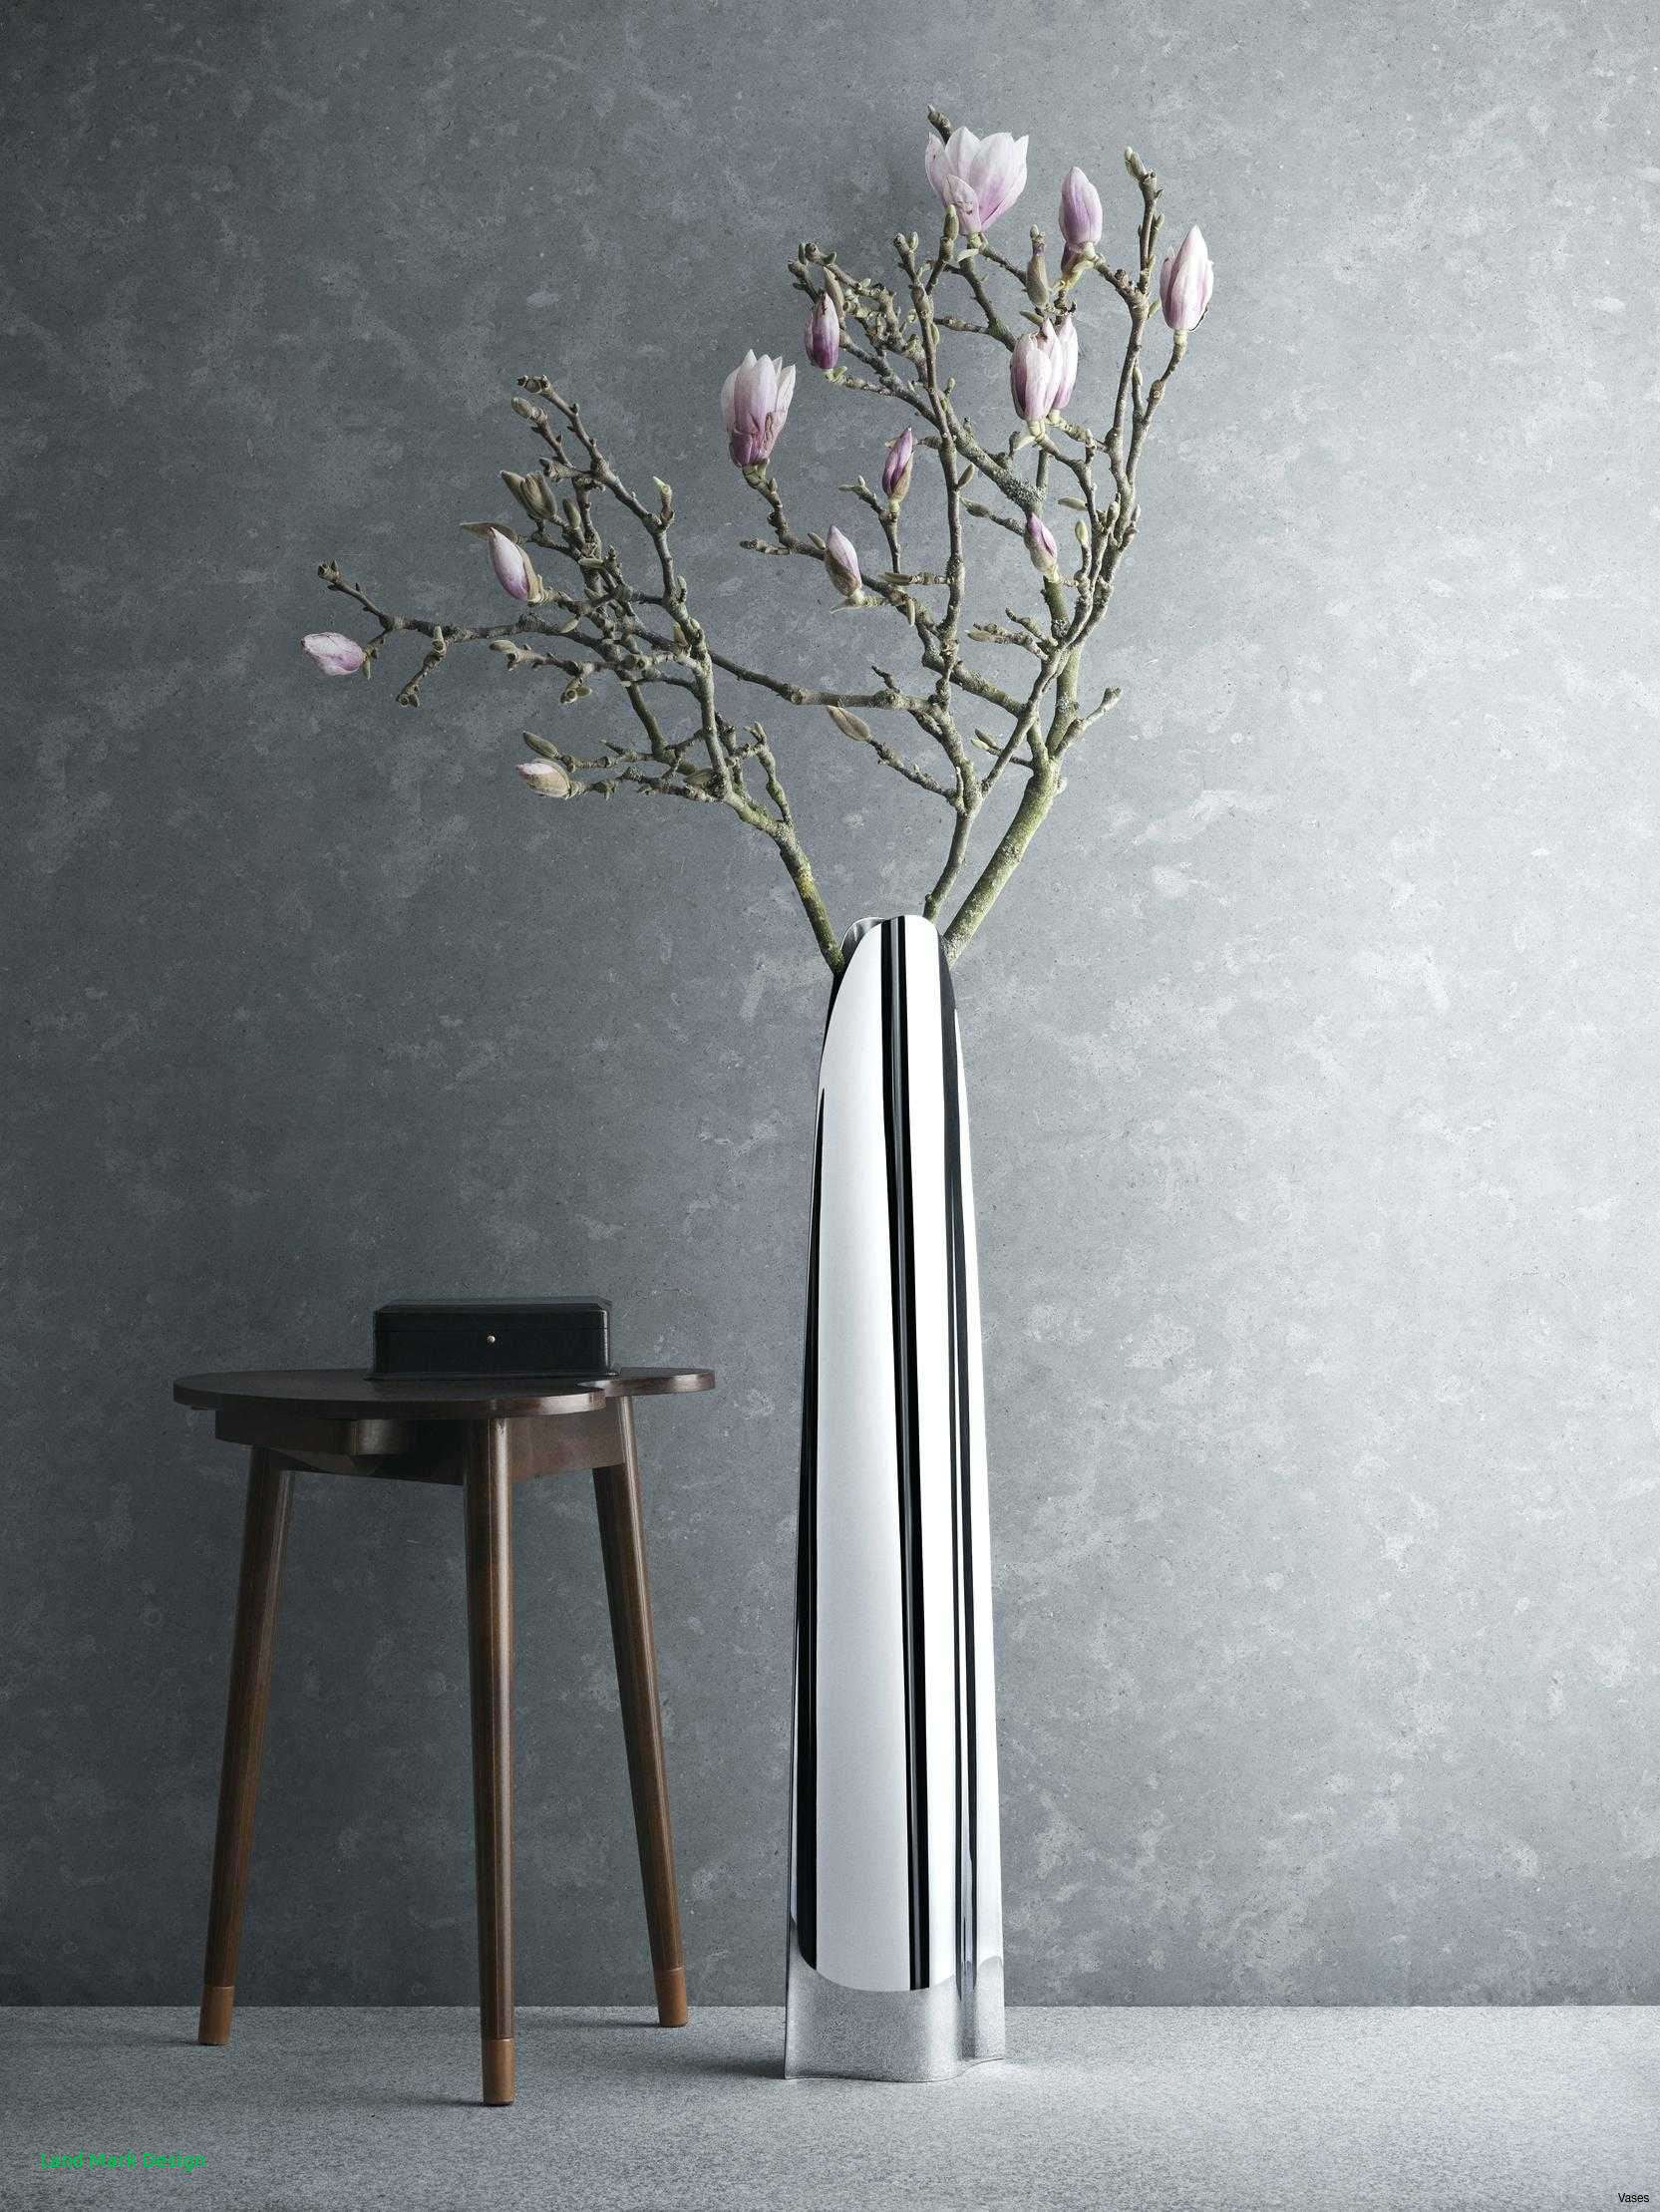 29 Nice Floor Vase with Sticks 2024 free download floor vase with sticks of tall vase with branches design home design within floor decor vase tall ideash vases contemporary fill a substantial with arrangement of led branches it